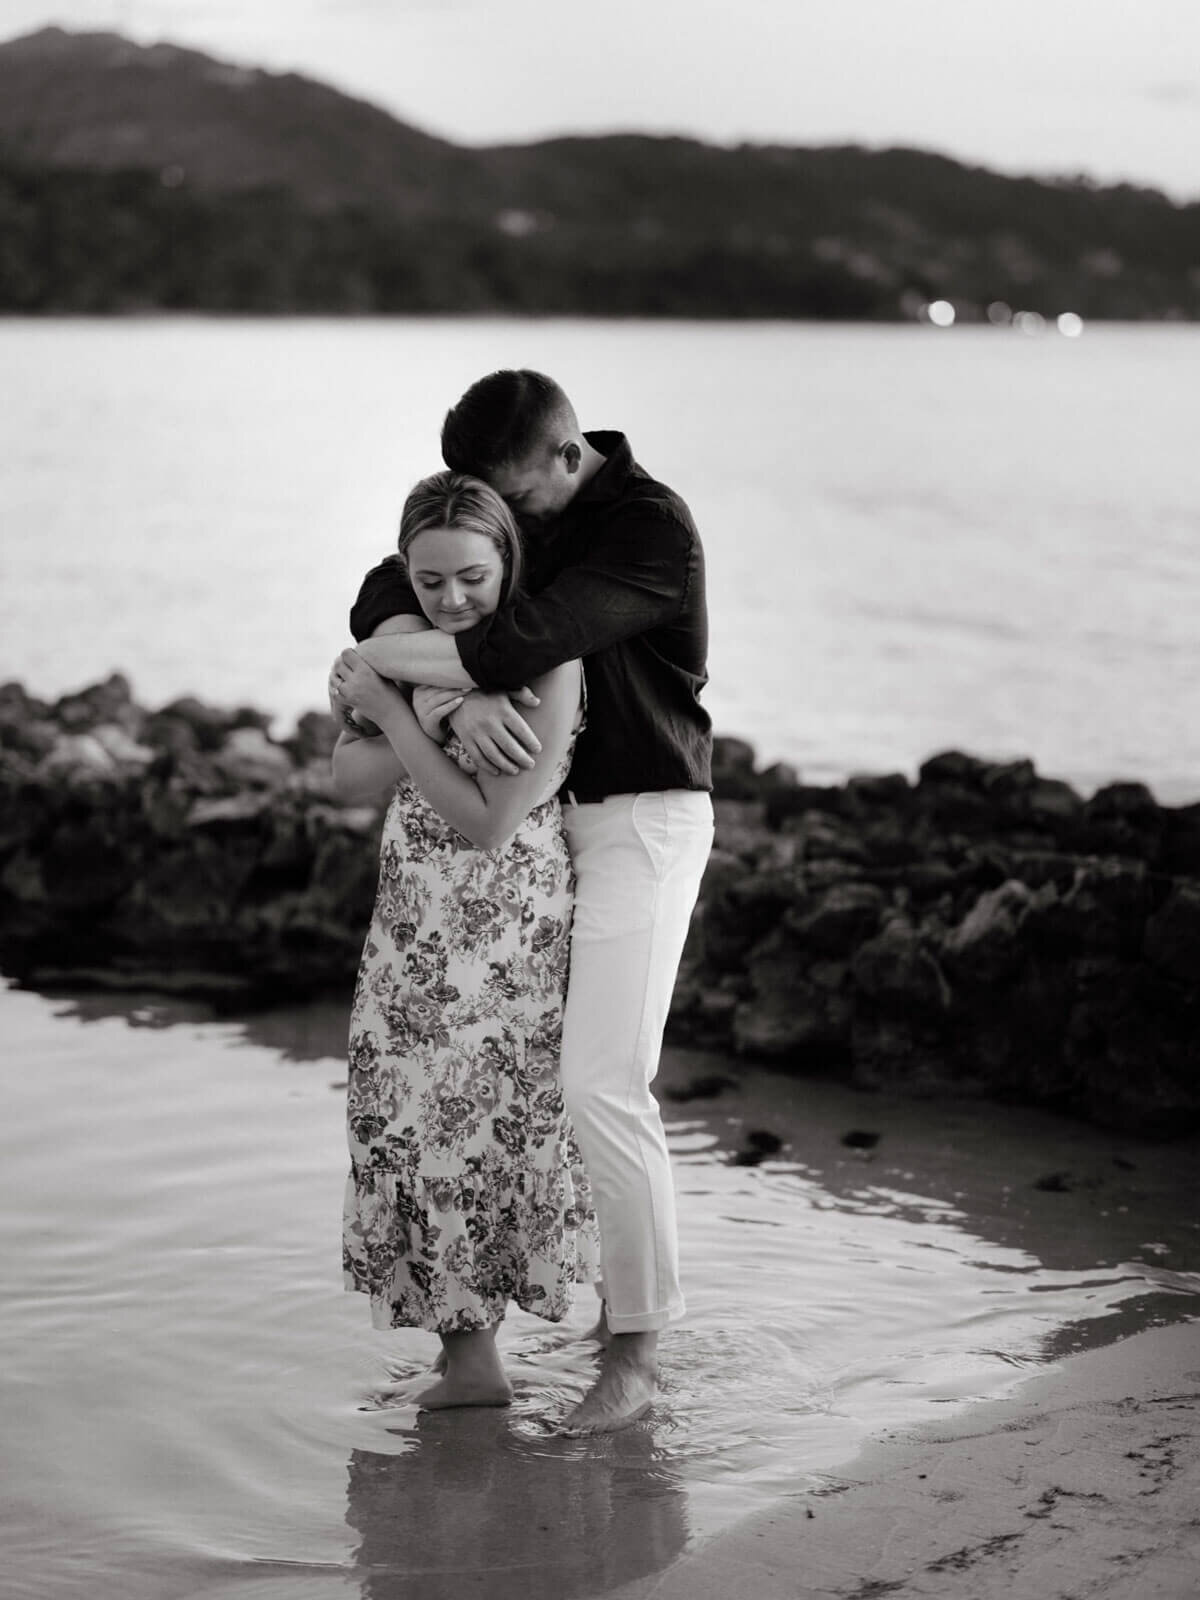 Black and white photo of the engaged couple standing on the seashore, with the man hugging the woman from behind